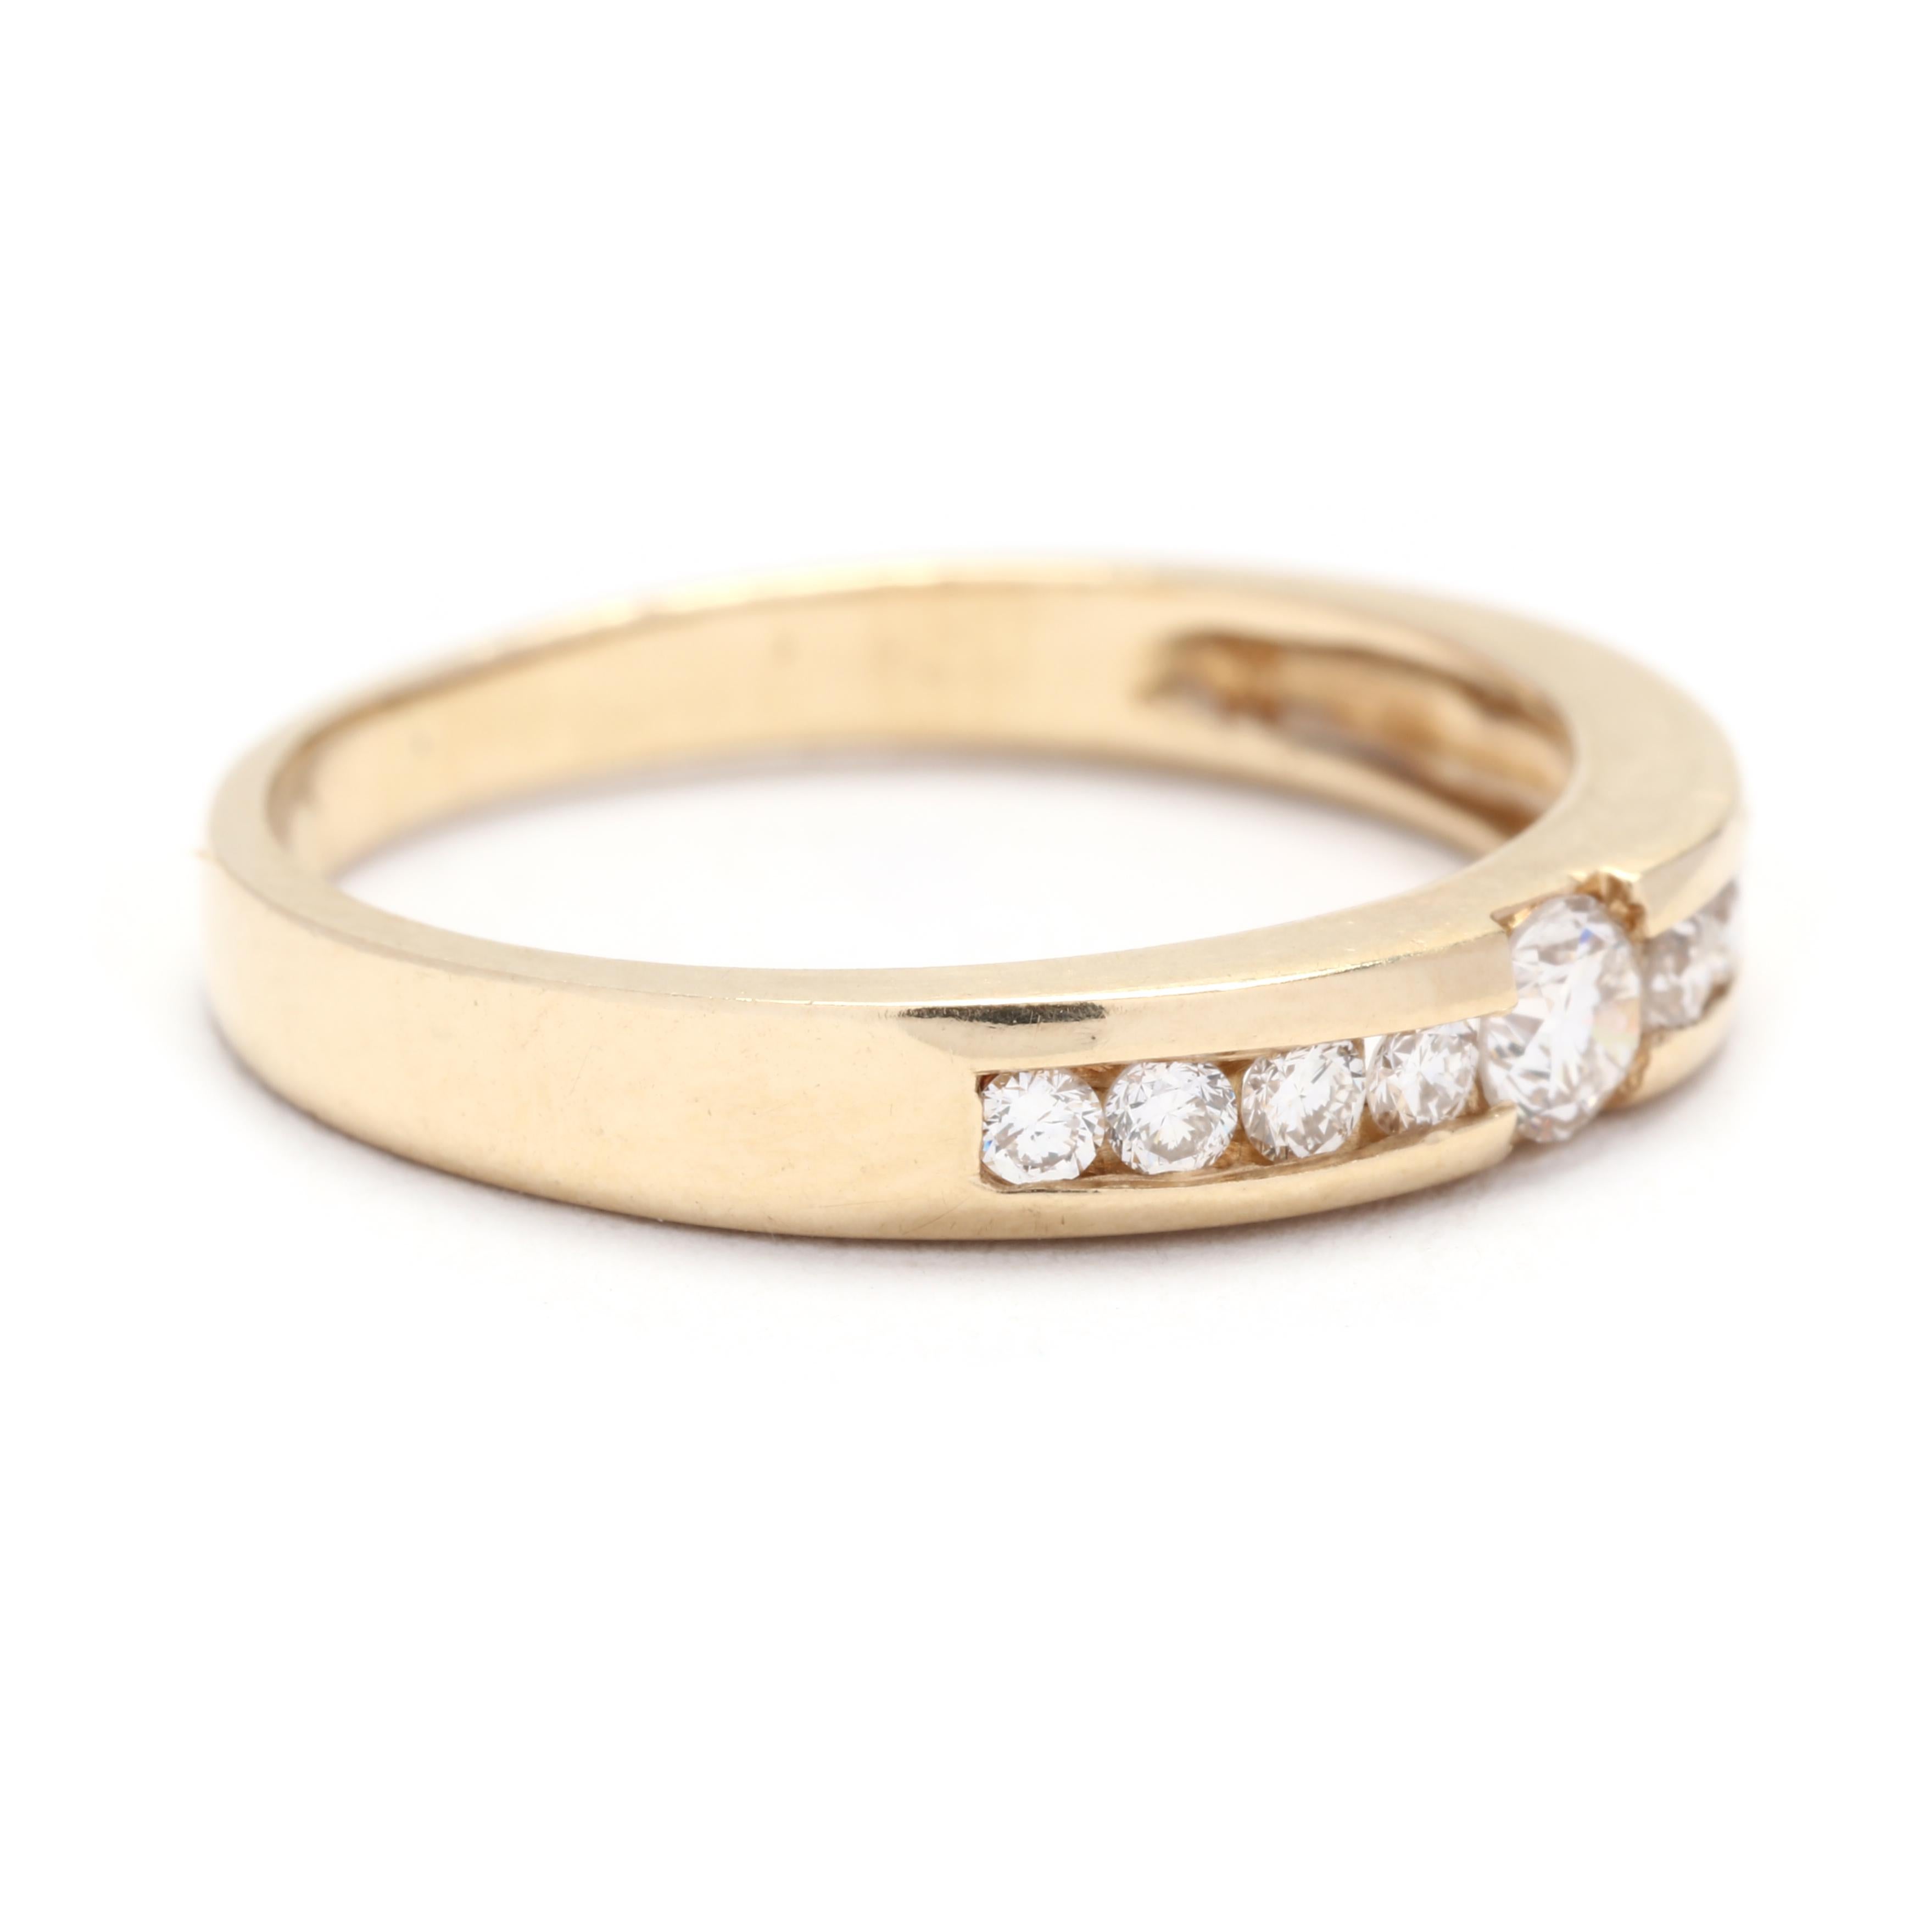 This ring is not only visually stunning but also versatile. With its stackable design, it can be easily paired with other rings to create a unique and personalized look. Whether you wear it on its own or stack multiple rings together, this band ring